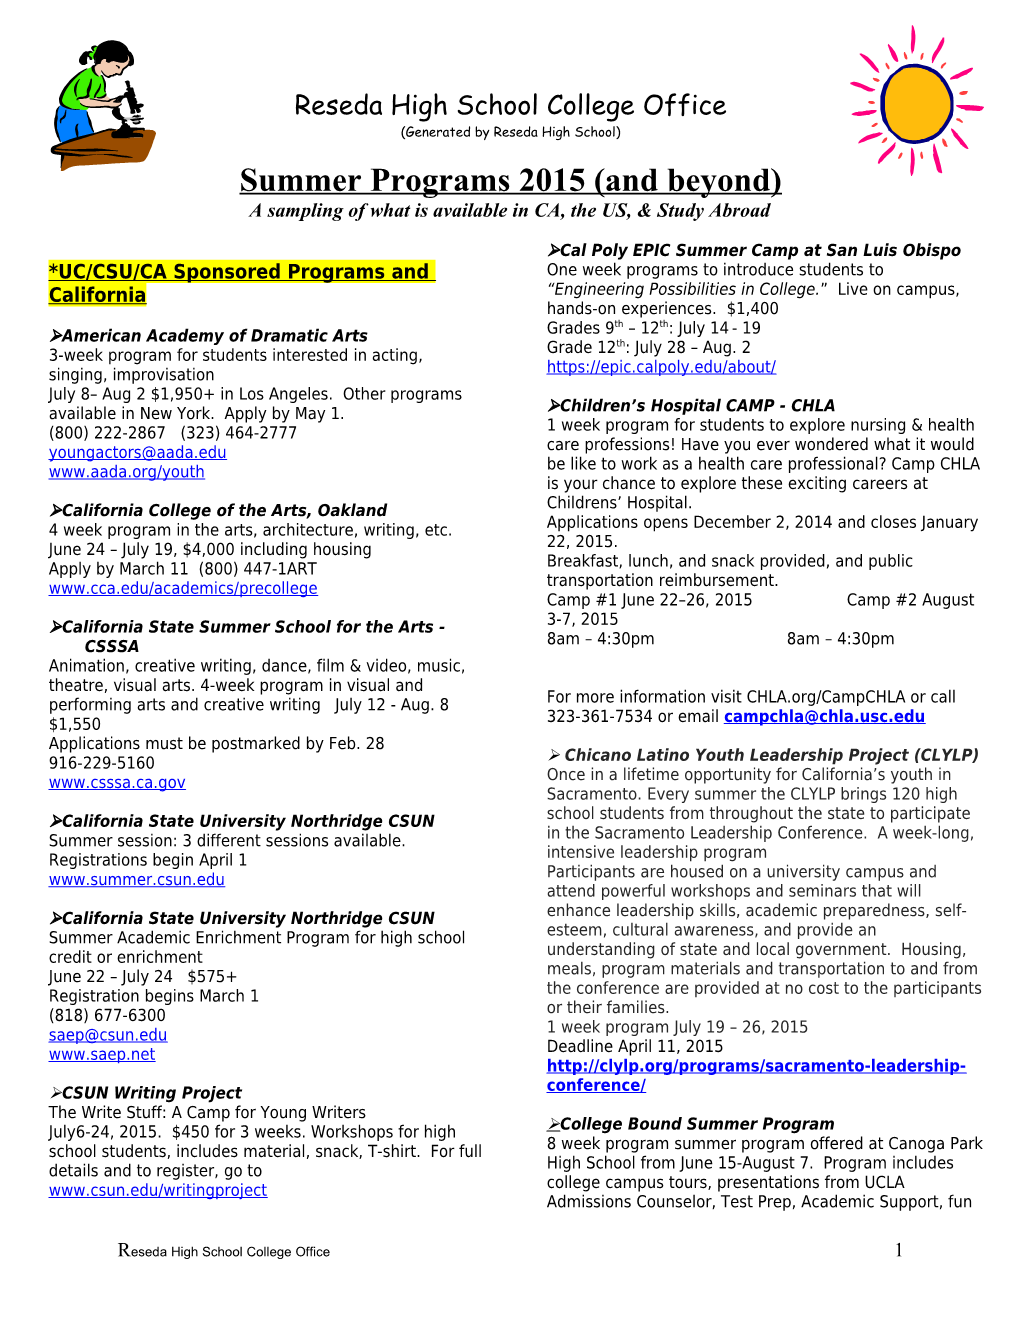 Summer Programs 2015 (And Beyond)